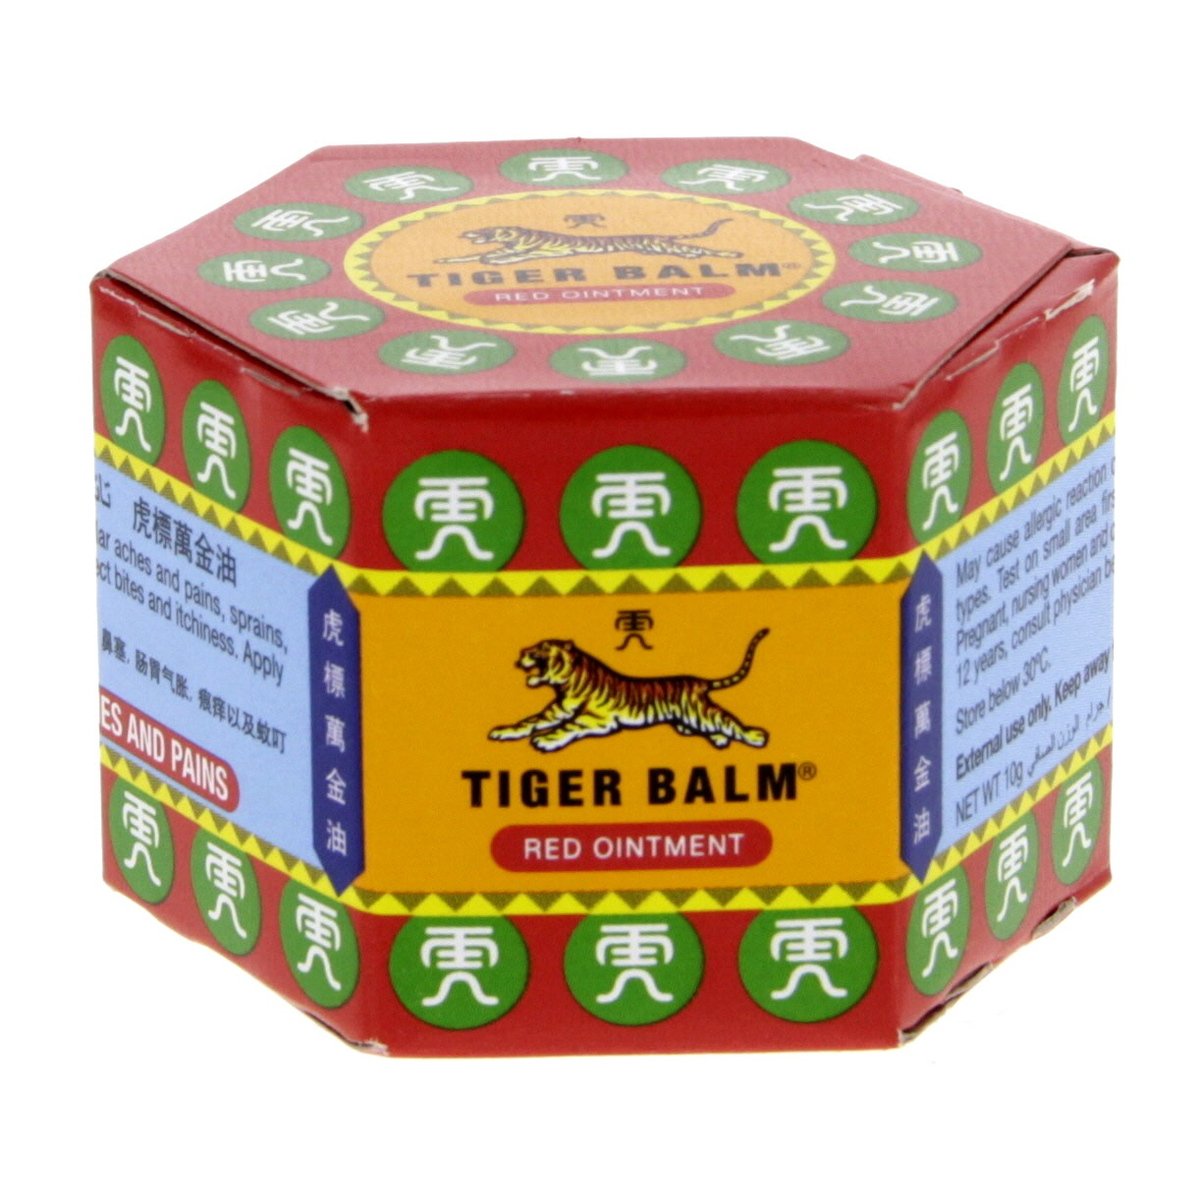 Tiger Balm, Red Pain Relieving Ointment - 19.4g. Quantity: 19.4 g Pack